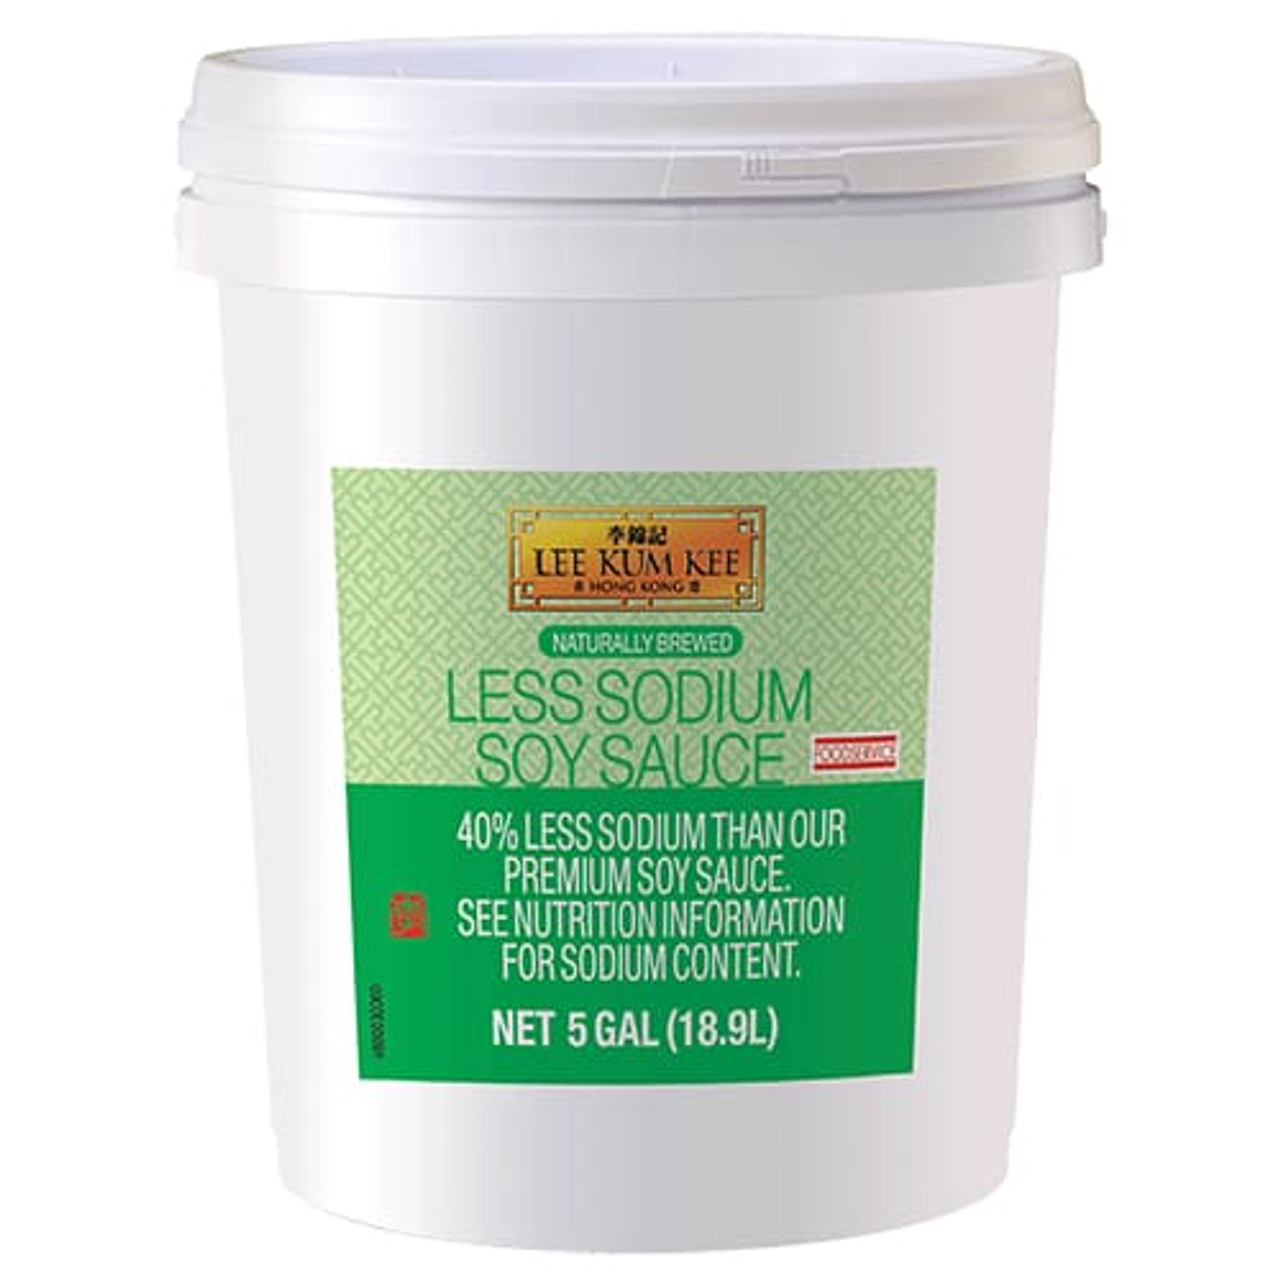 Lee Kum Kee Less Sodium Soy Sauce 5 Gallon - Healthier Option for High-Volume Bulk Food Service I Pallet of 36 I Total 72 Gallons - Chicken Pieces